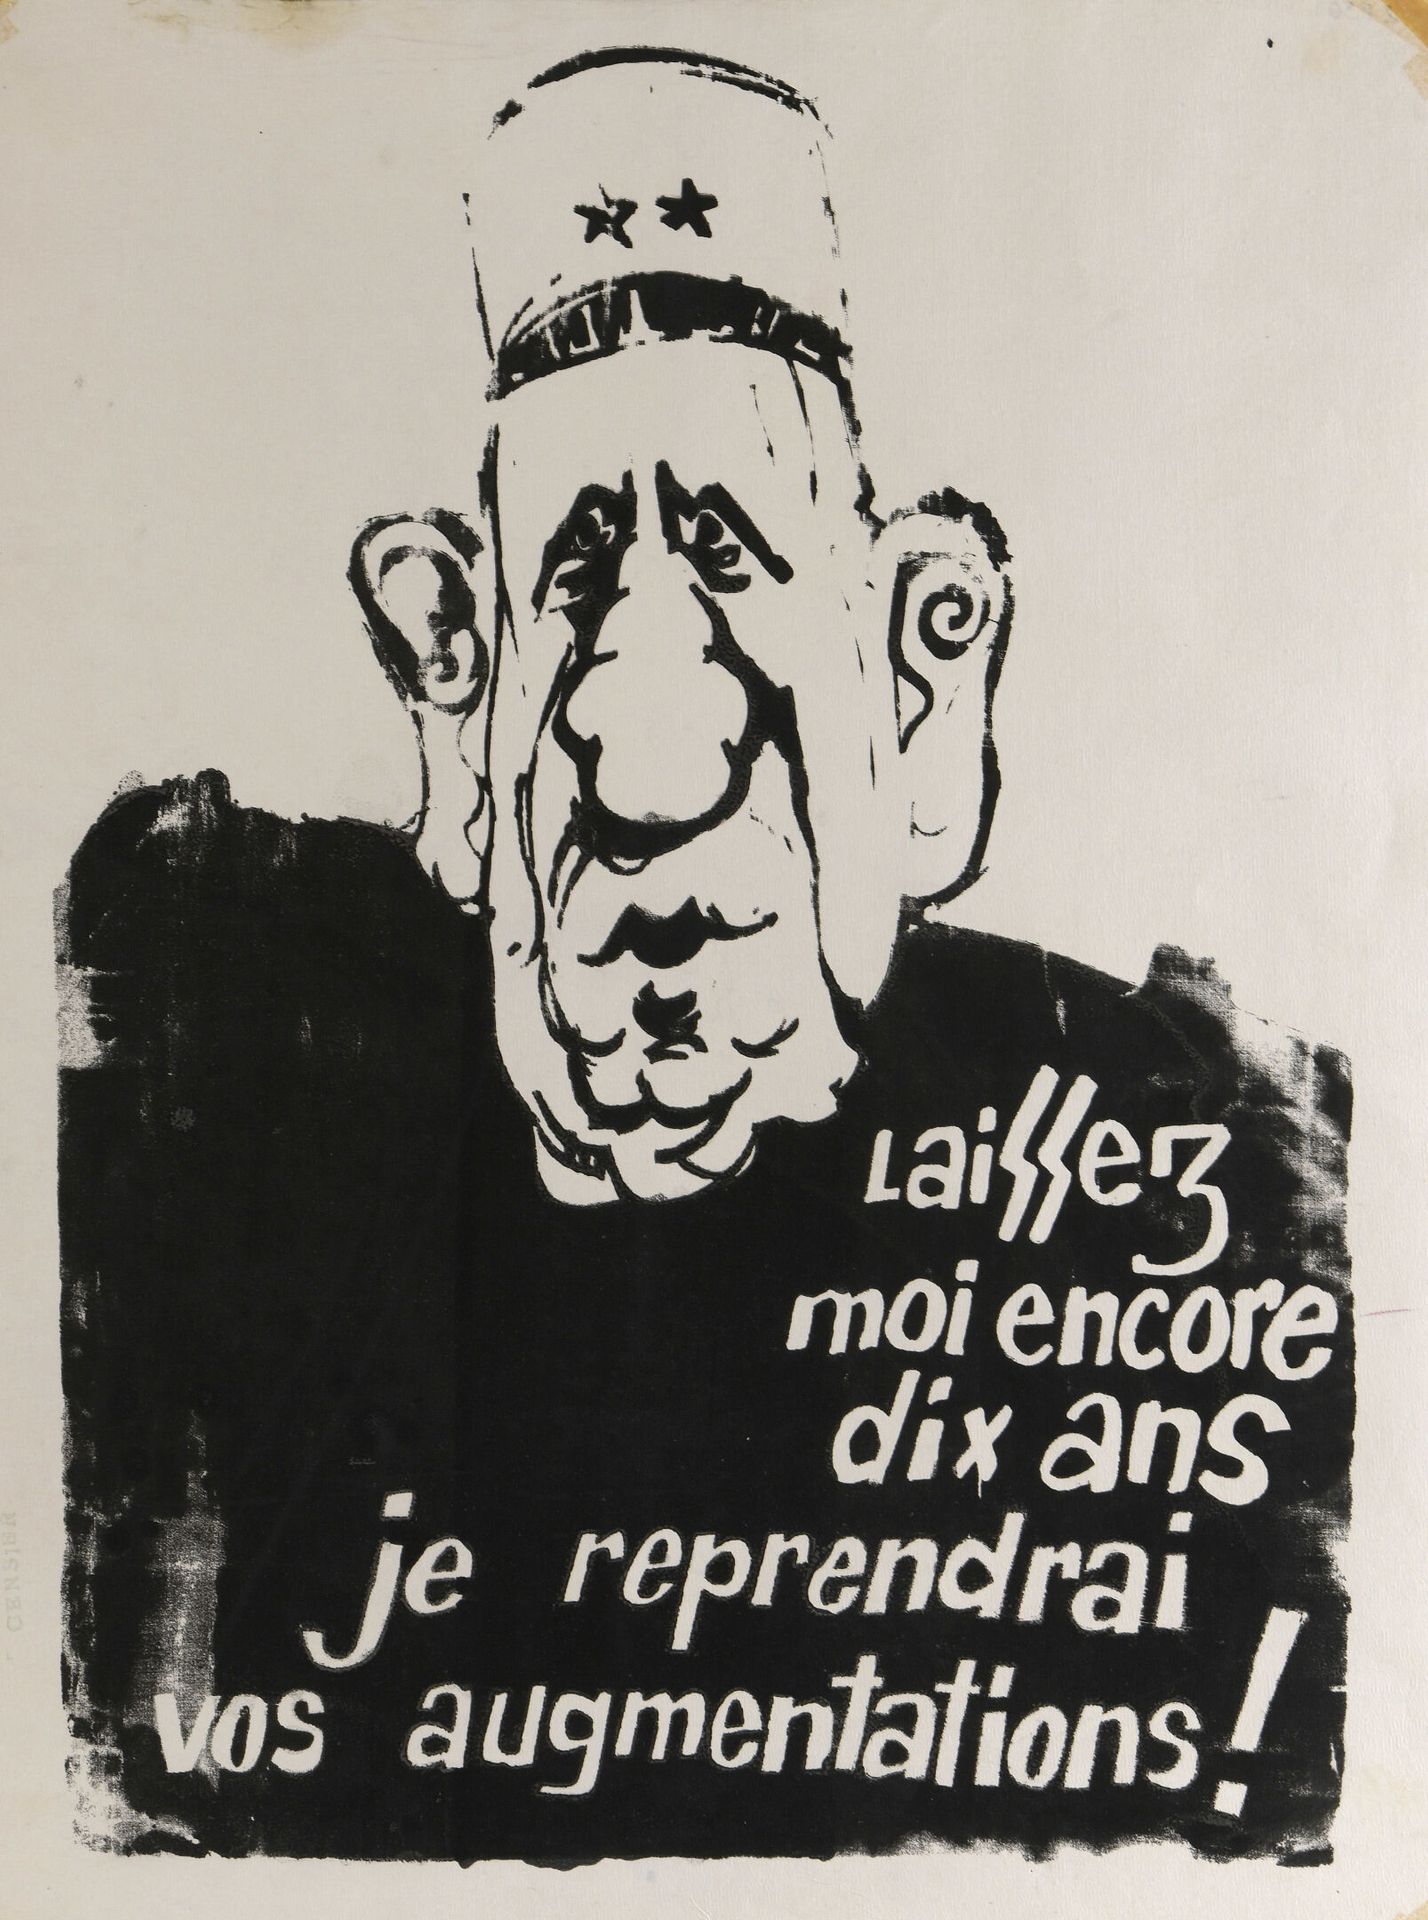 Null [Poster of May 1968]

Censier [University]

Give me another ten years - I'l&hellip;